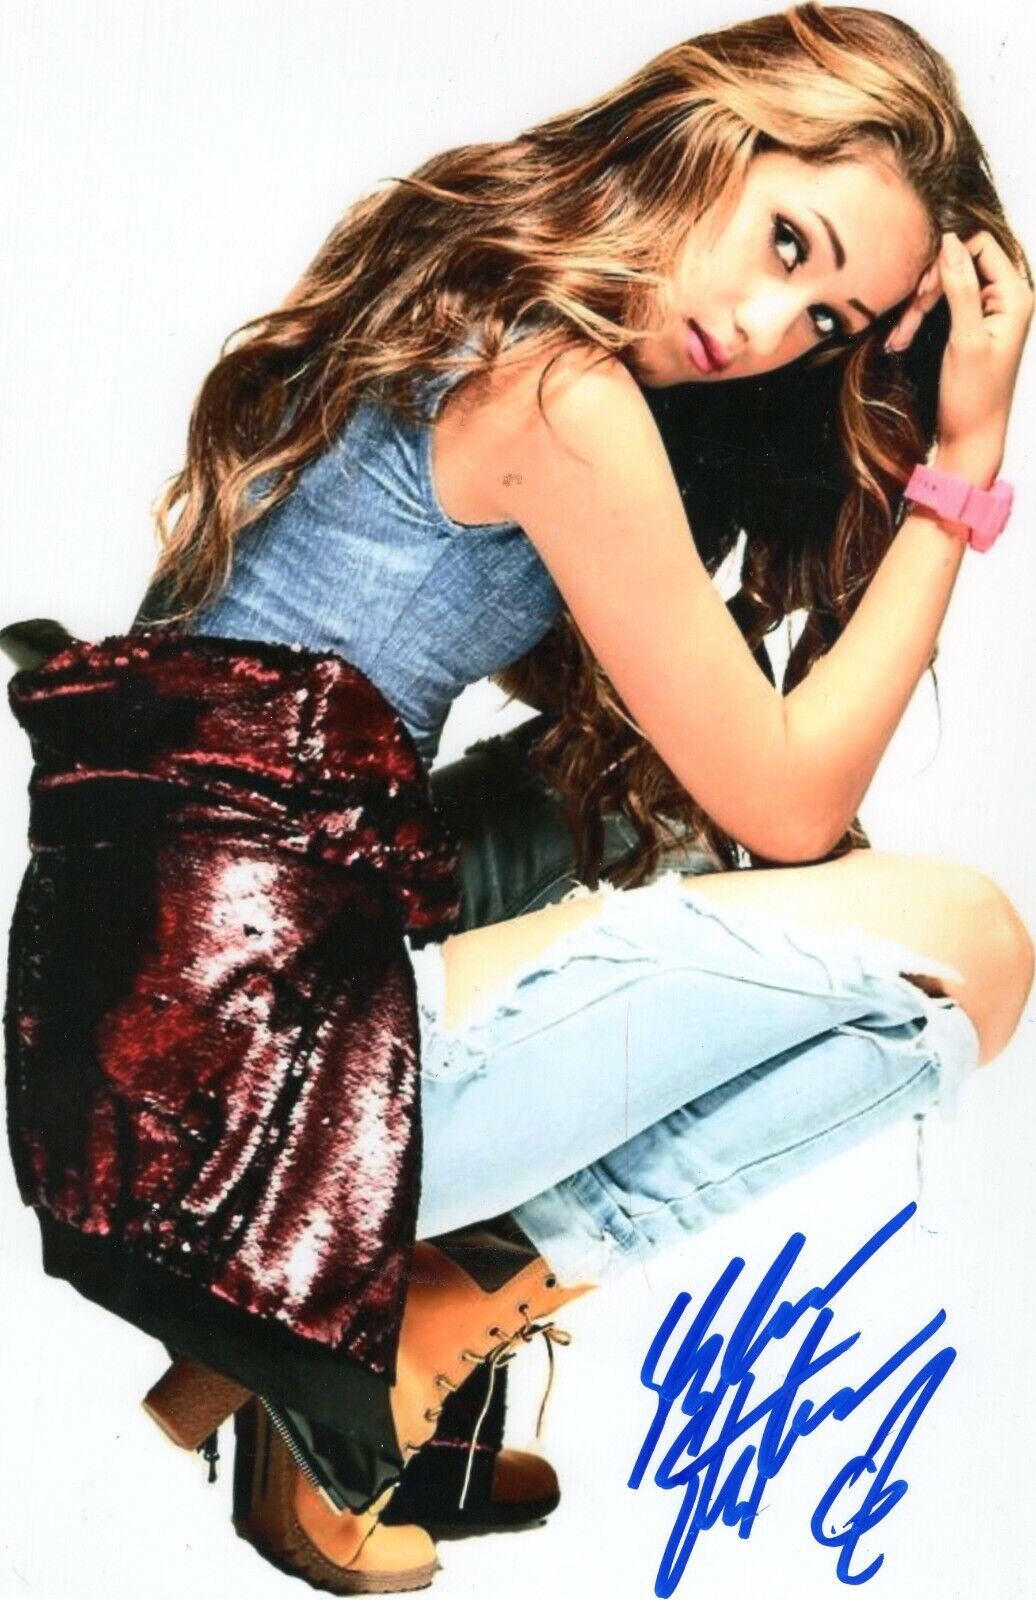 NEW MUSIC STAR SKYLAR STECKER SIGNED 8X10 PHOTO W/COA ONLY WANT YOU